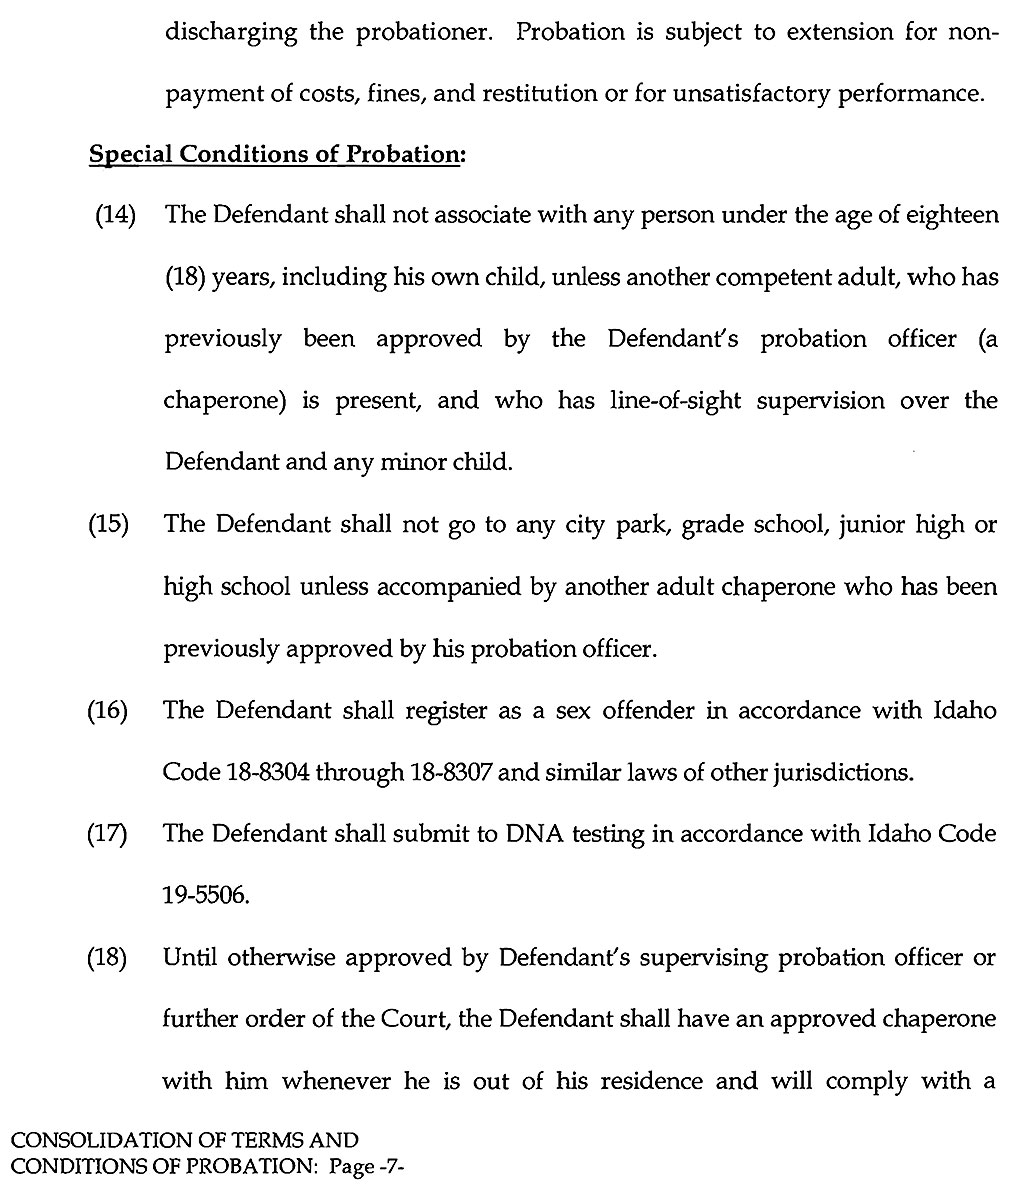 Consolidation of Terms and Conditions of Probation page 7